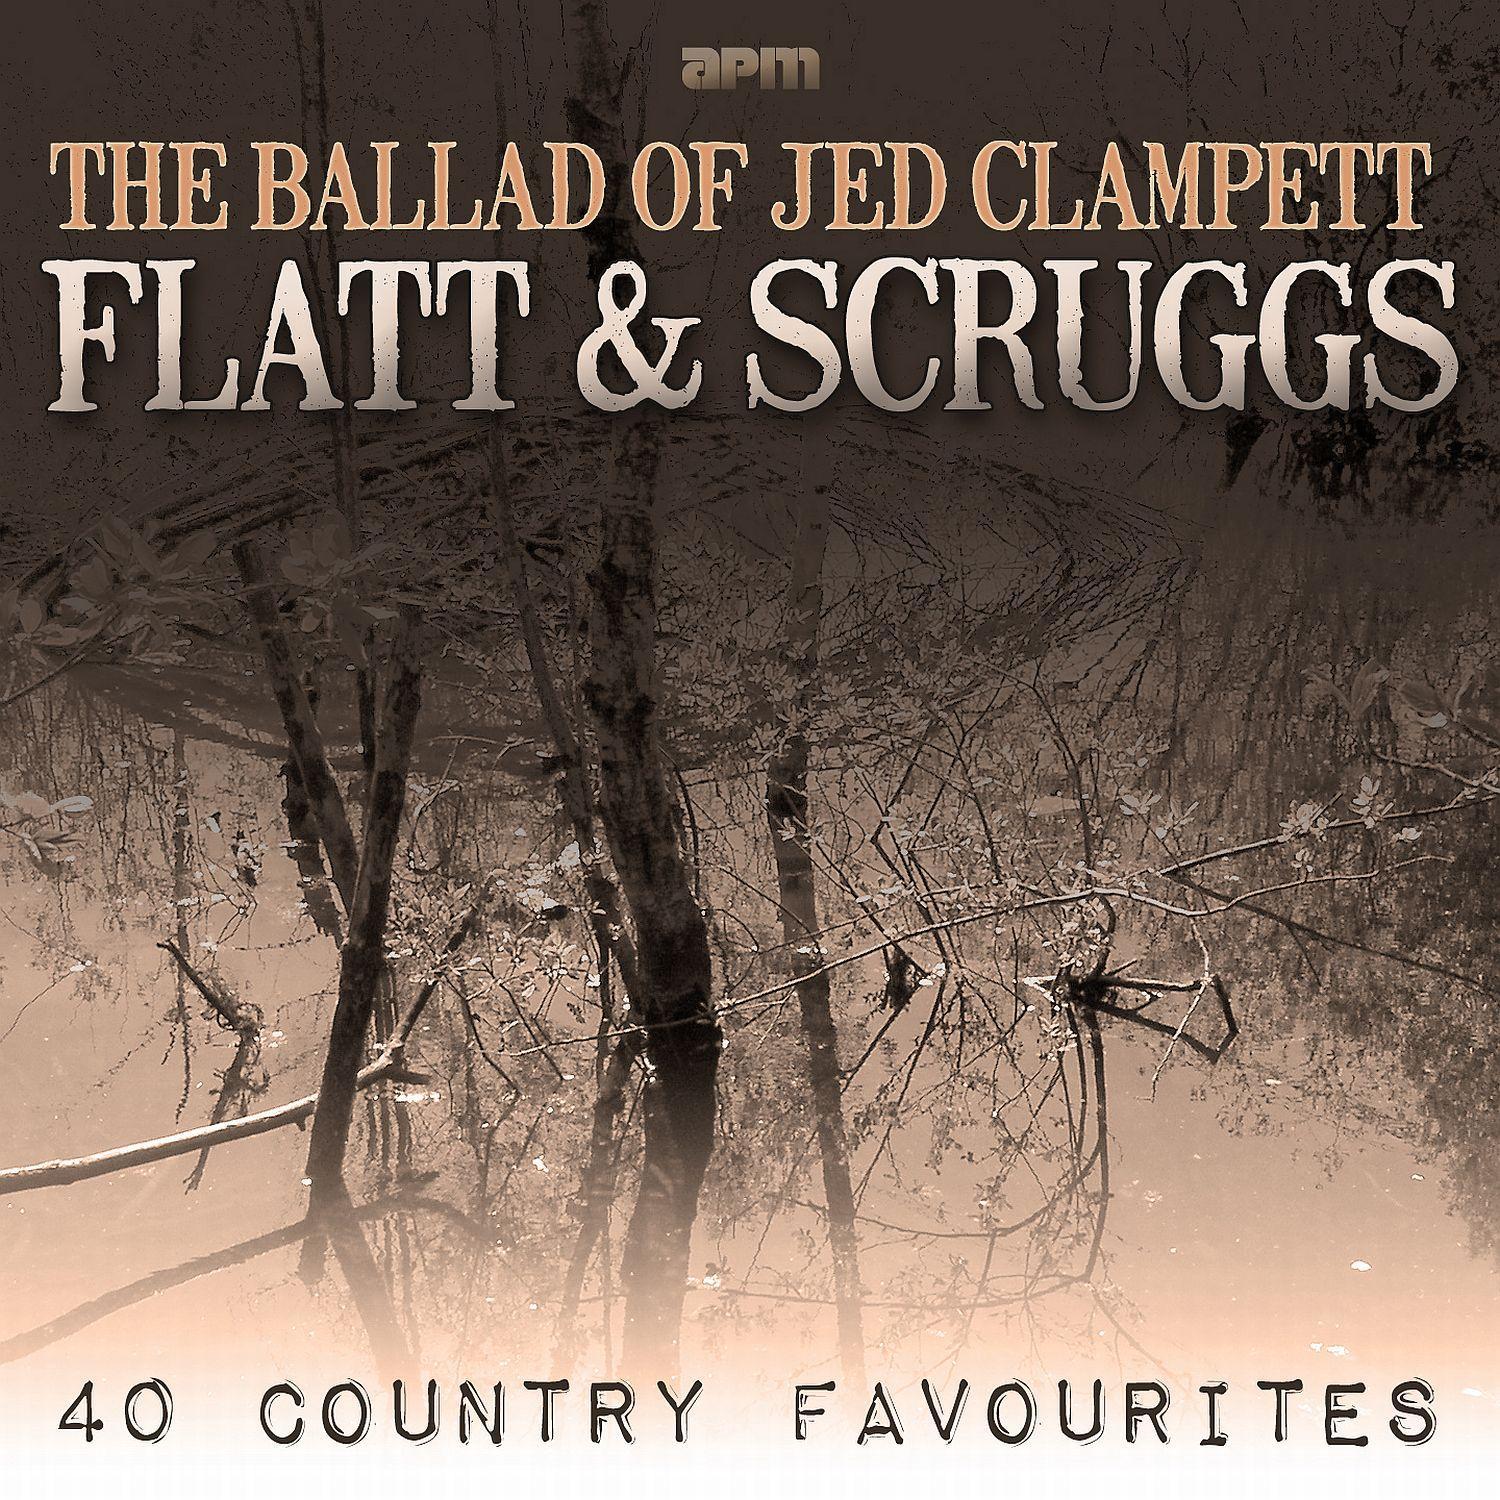 The Ballad of Jed Clampett - 40 Country Favourites